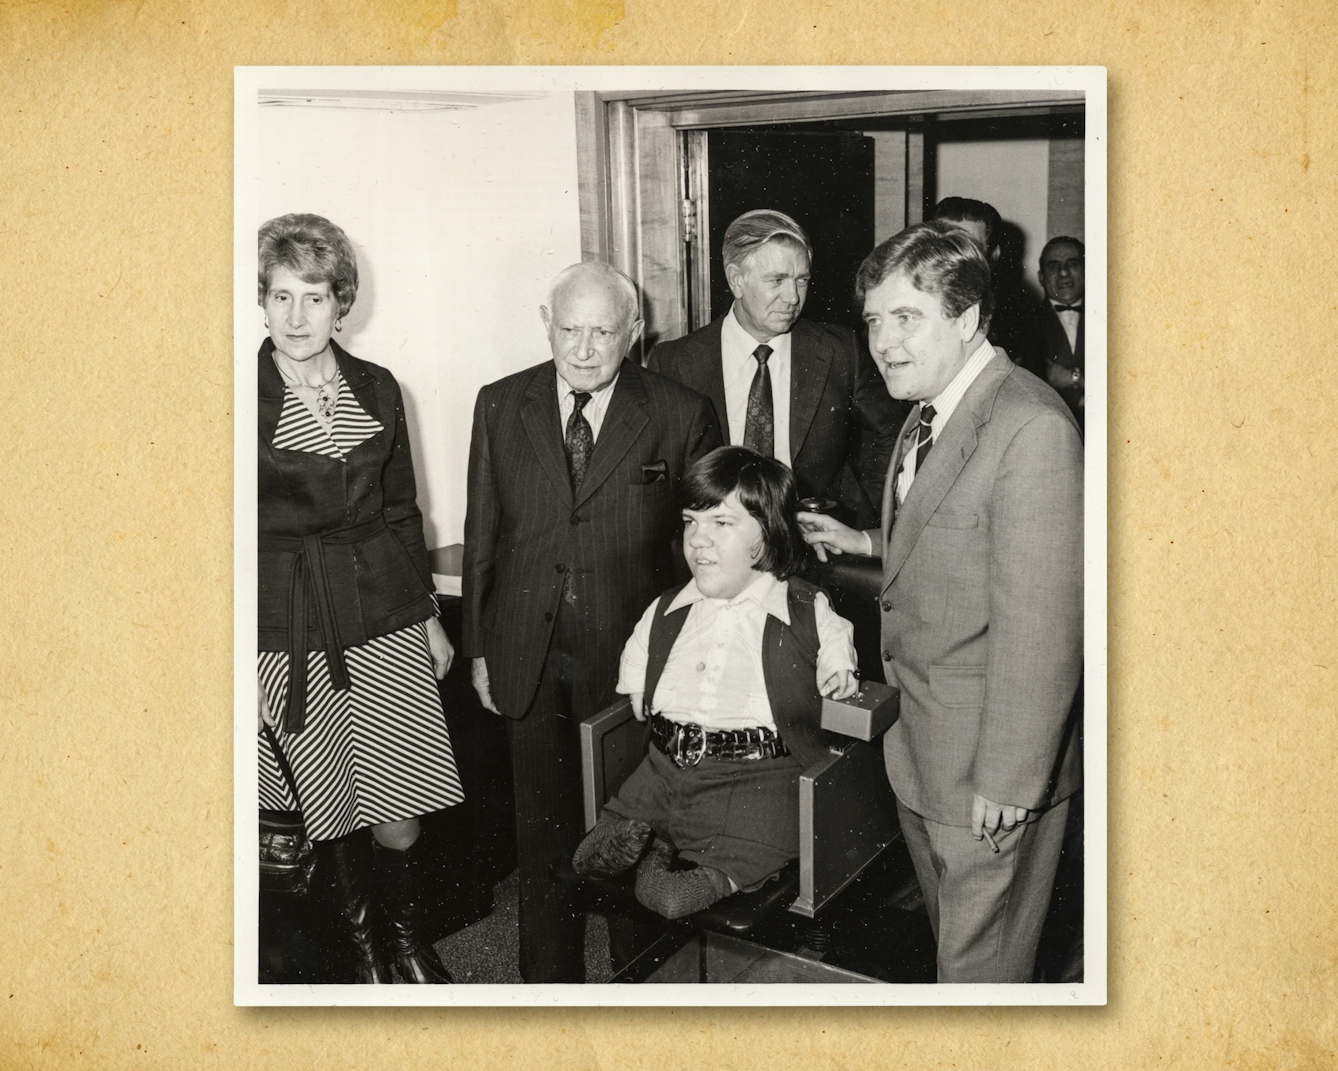 Photograph of a black and white photographic print, resting on a brown paper textured background. The print shows a young man seated in the centre of the image who has short arms and legs as a result of his mother being prescribed thalidomide during pregnancy. The young man is surrounded by a woman and three older men in suits and ties.